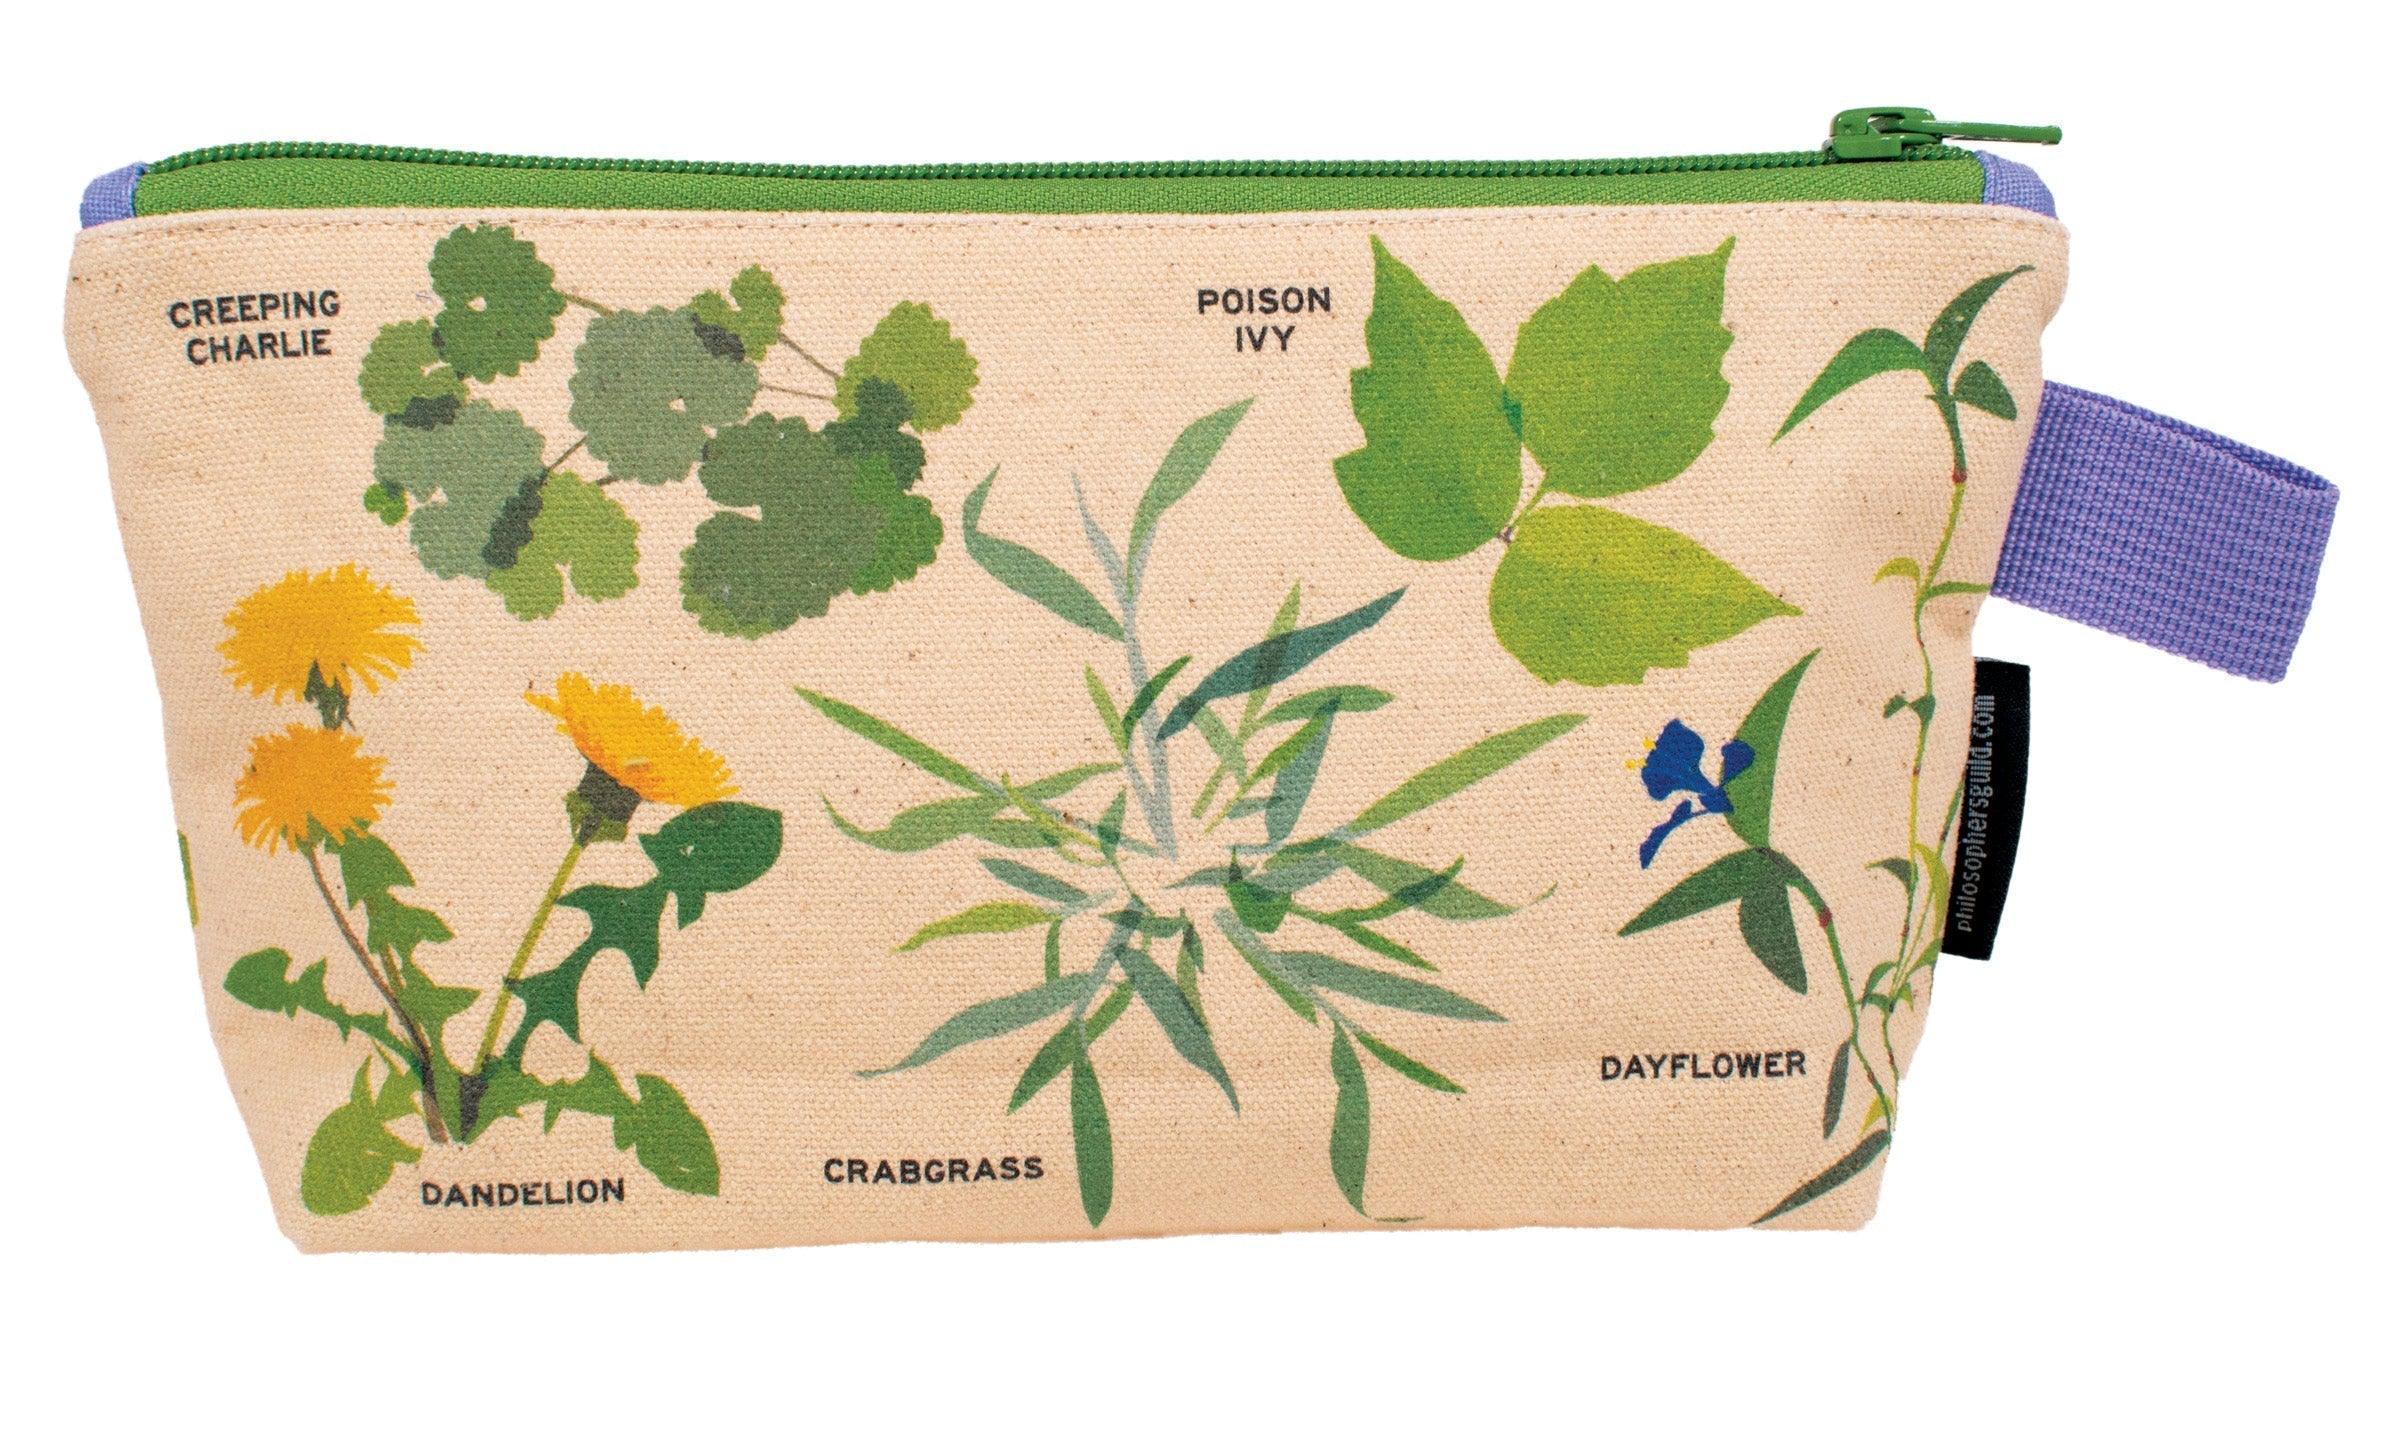 Product photo of Weed Zipper Bag, a novelty gift manufactured by The Unemployed Philosophers Guild.